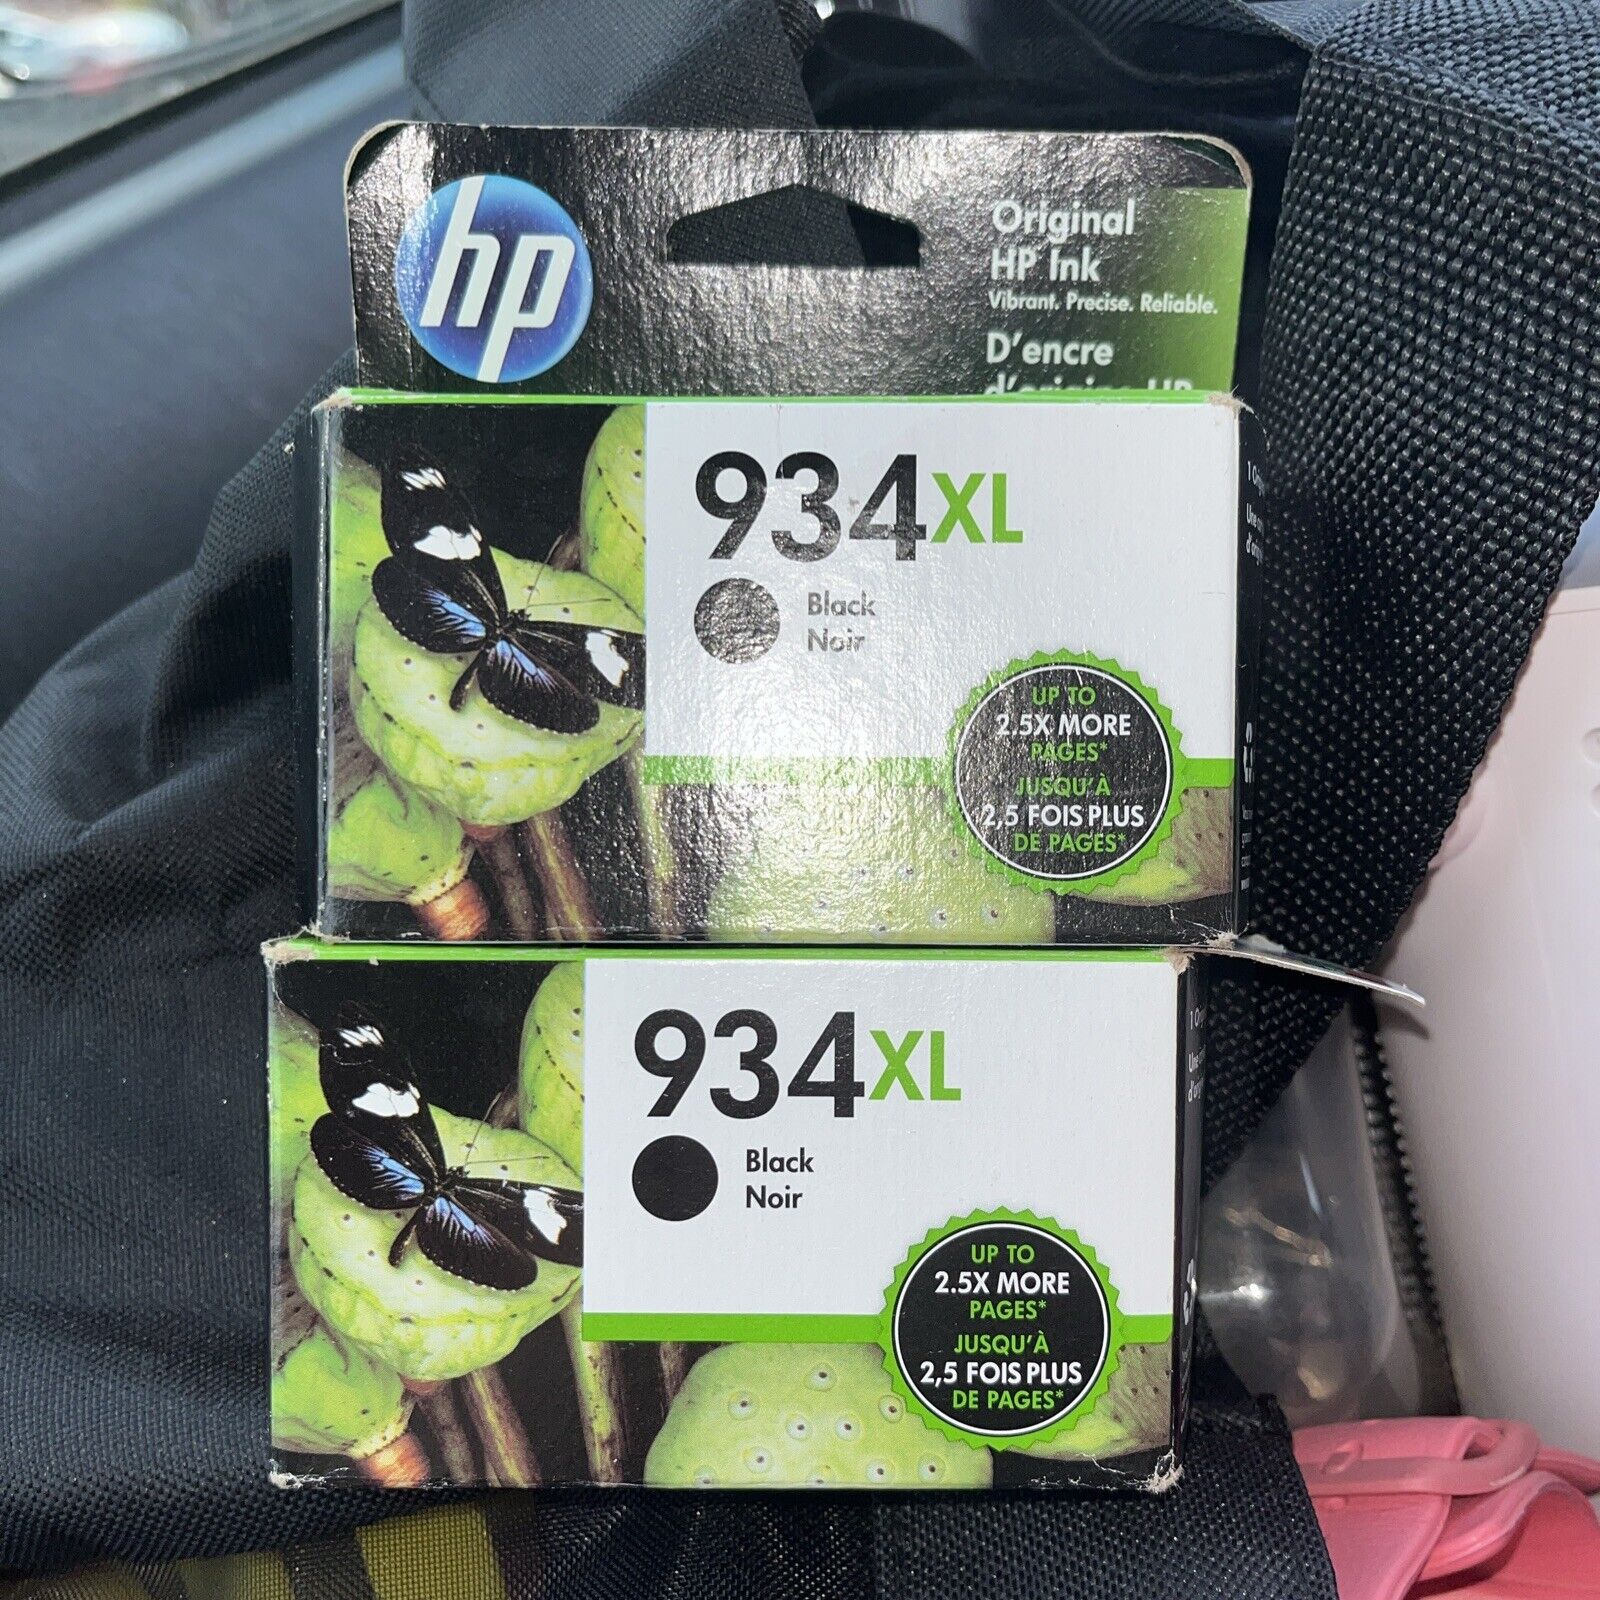 NEW Lot Of 2 Genuine HP 934XL Black Ink Cartridges New, One Opened May 2021